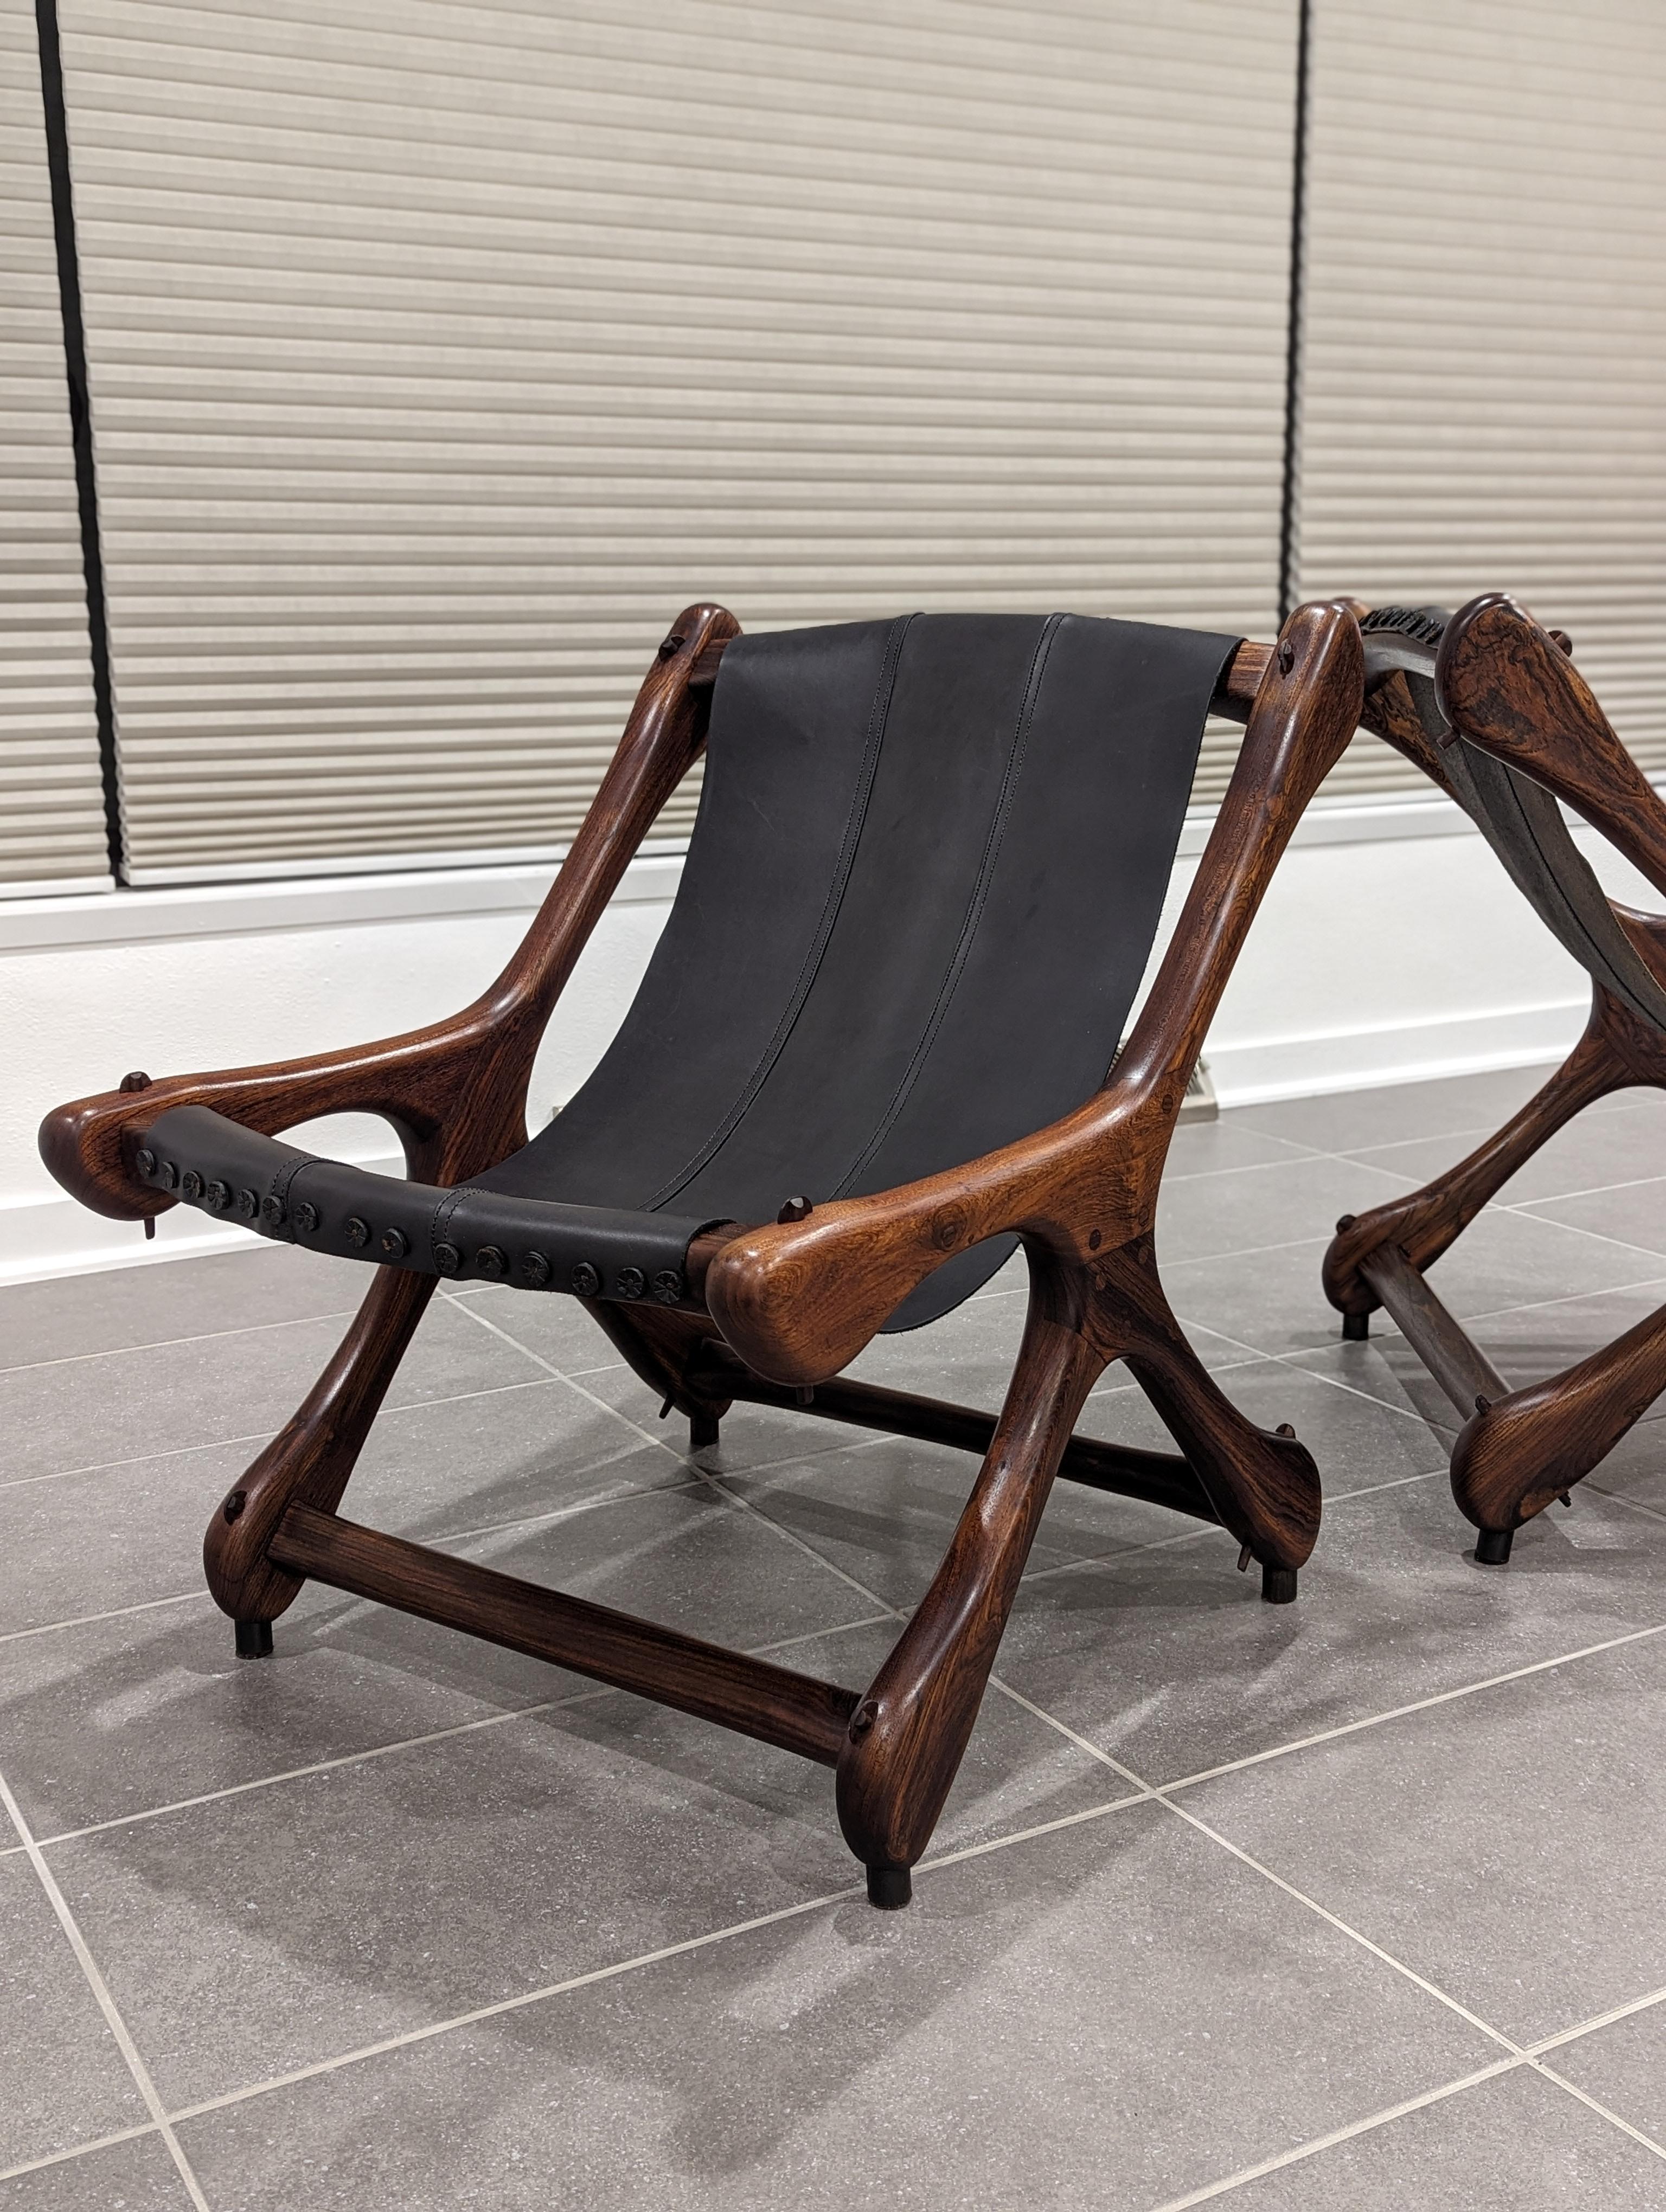 Don Shoemaker Sloucher Rosewood & Leather Sling Chairs for Señal, S.A., 1960s For Sale 8